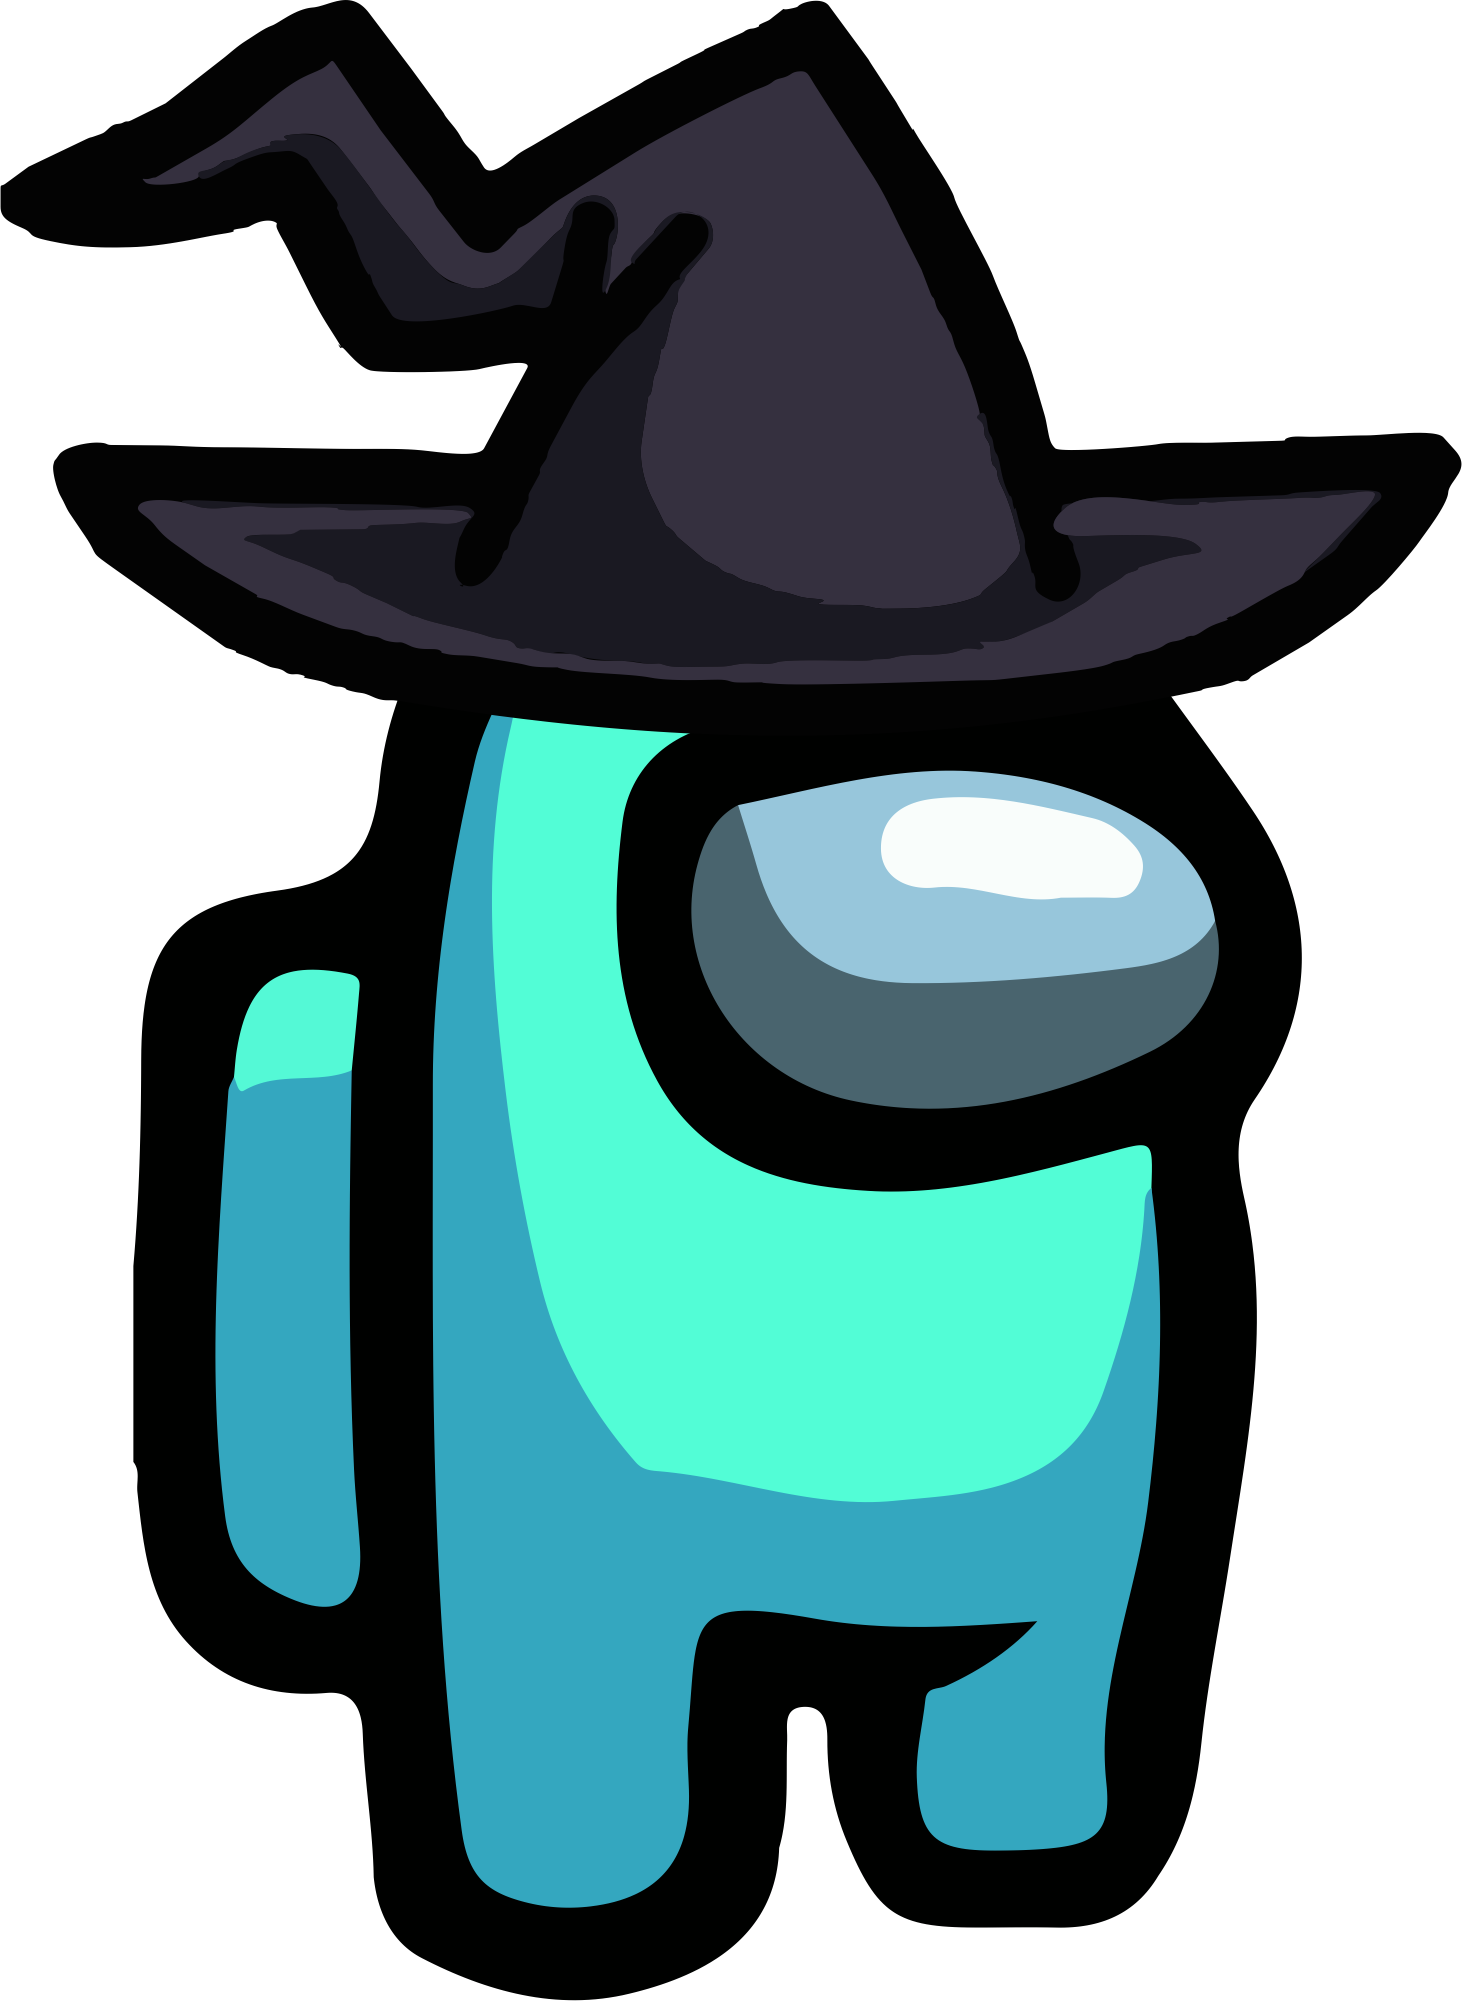 among-us-cyan-witch-hat-png-01